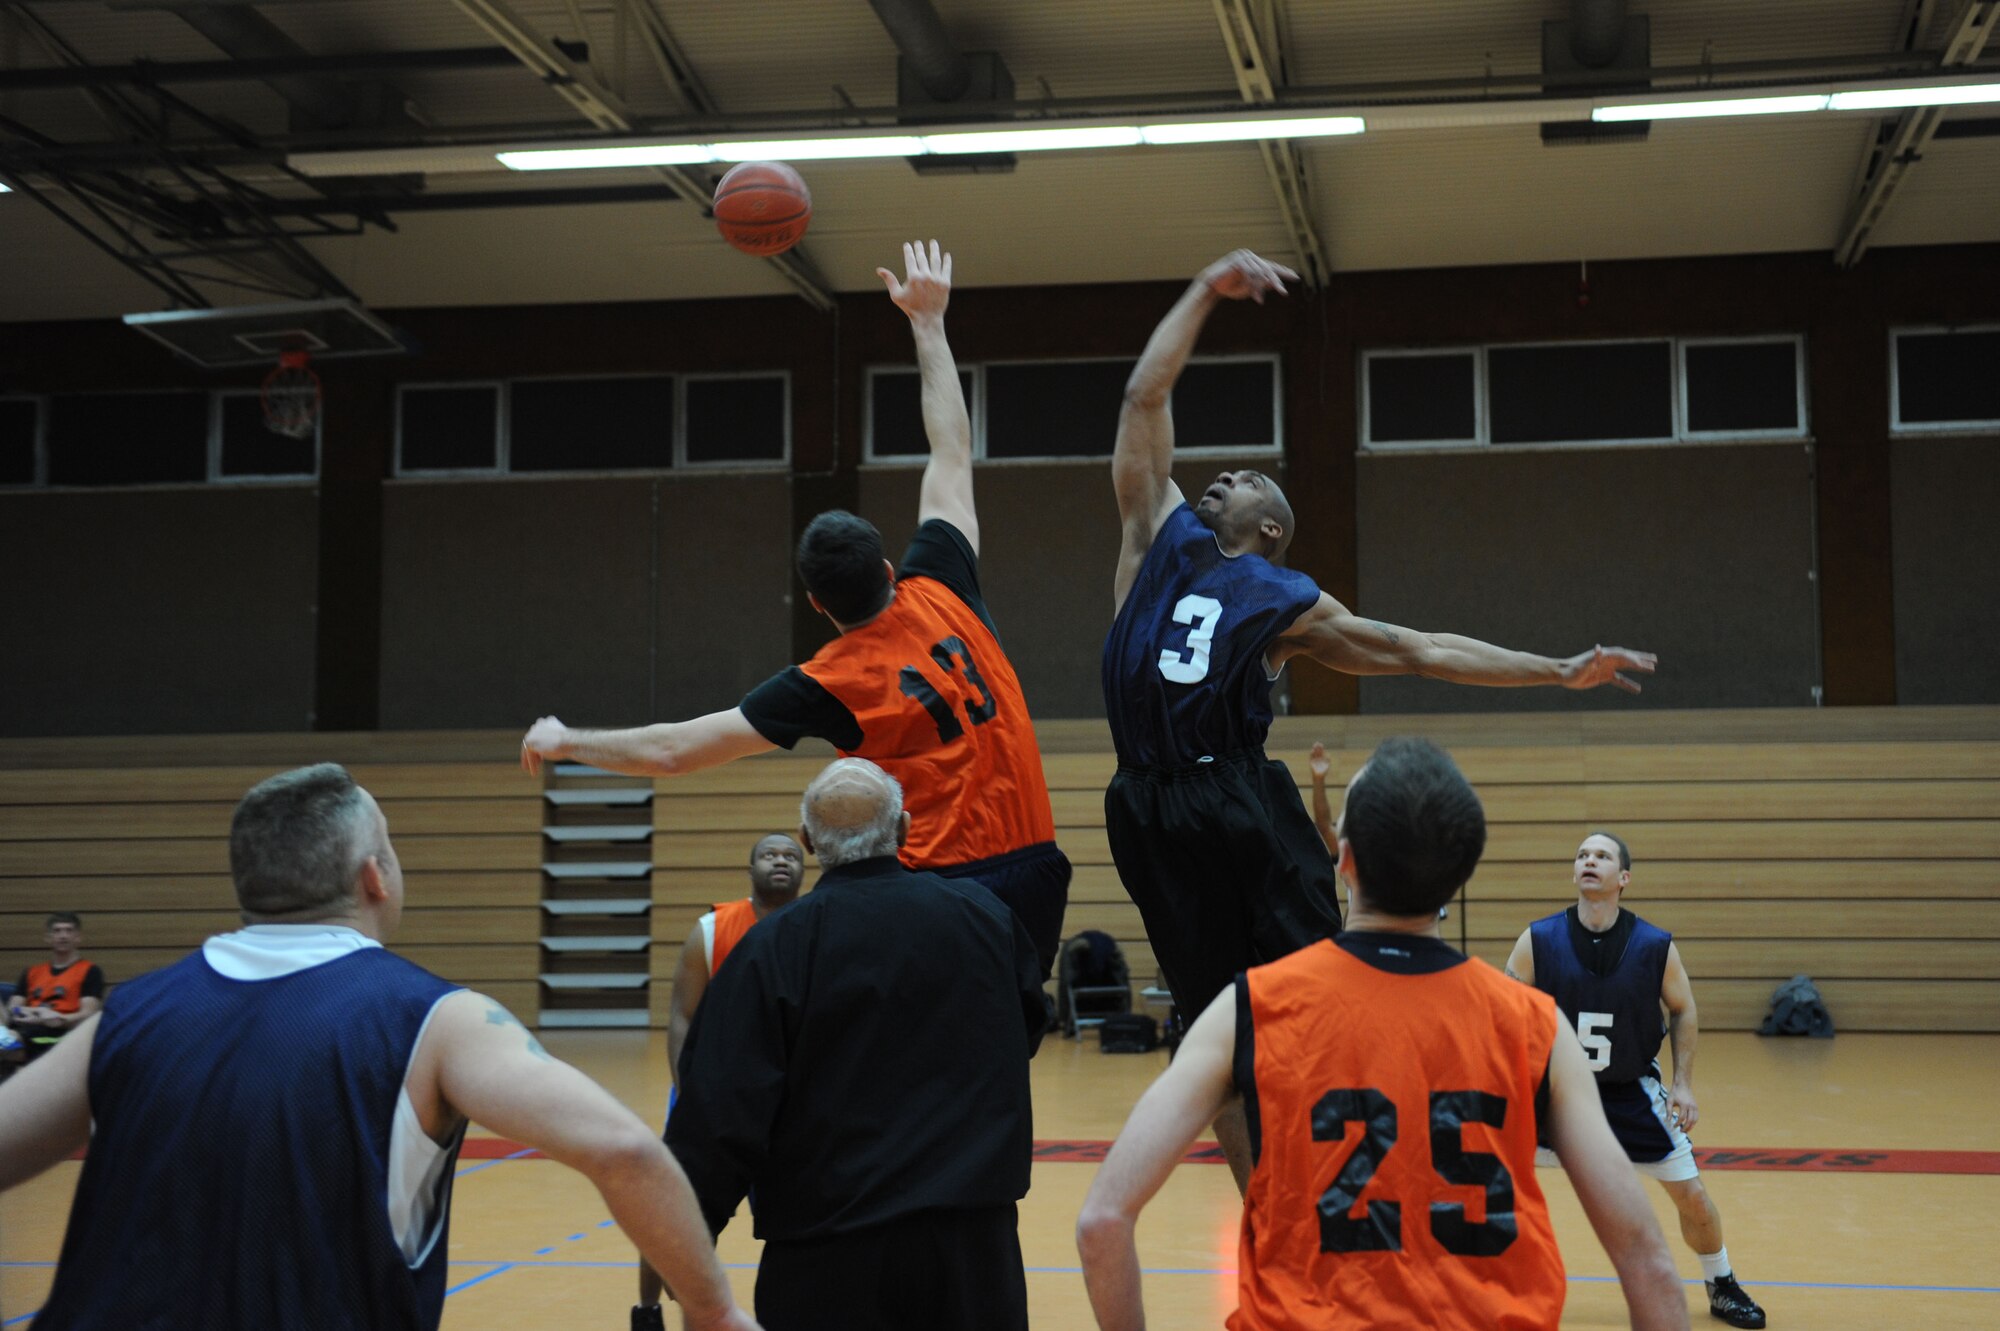 SPANGDAHLEM AIR BASE, Germany –(L to R) Brandon Pieper, 52nd Medical Group, and Tommie Albright, 726th Air Mobility Squadron, jump for the ball during the opening tip-off of an over-30 basketball league playoff game at the Skelton Memorial Fitness Center here Feb. 7. The 726th AMS team rose to victory against the 52nd MDG with a final score of 37-27. The league championship game will take place Feb. 13 at the fitness center. (U.S. Air Force photo by Senior Airman Christopher Toon/Released)